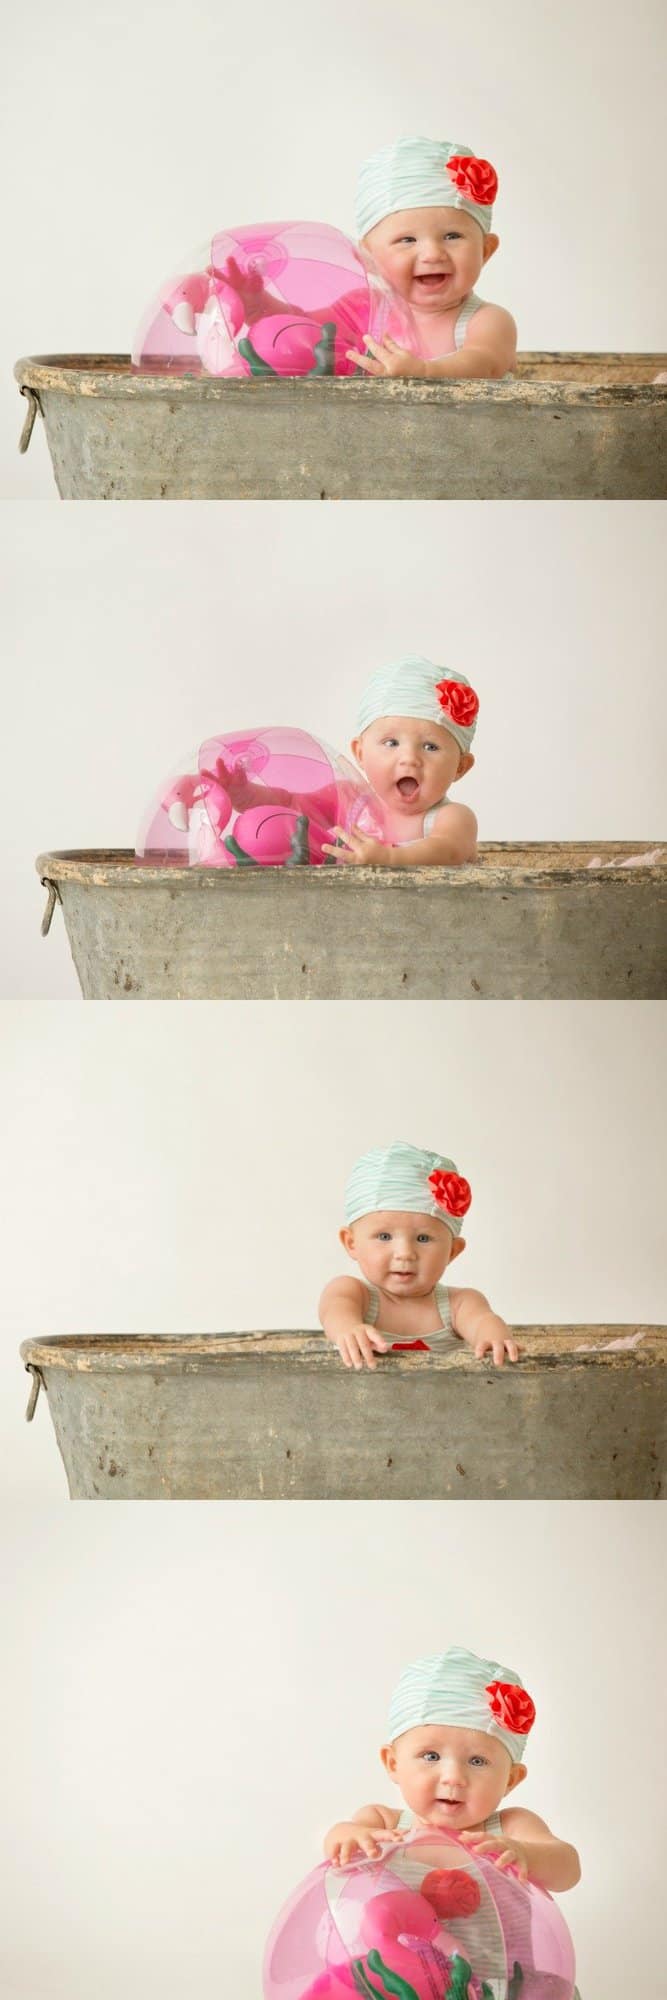 Brookie's 6 Month PIctures - The BakerMama